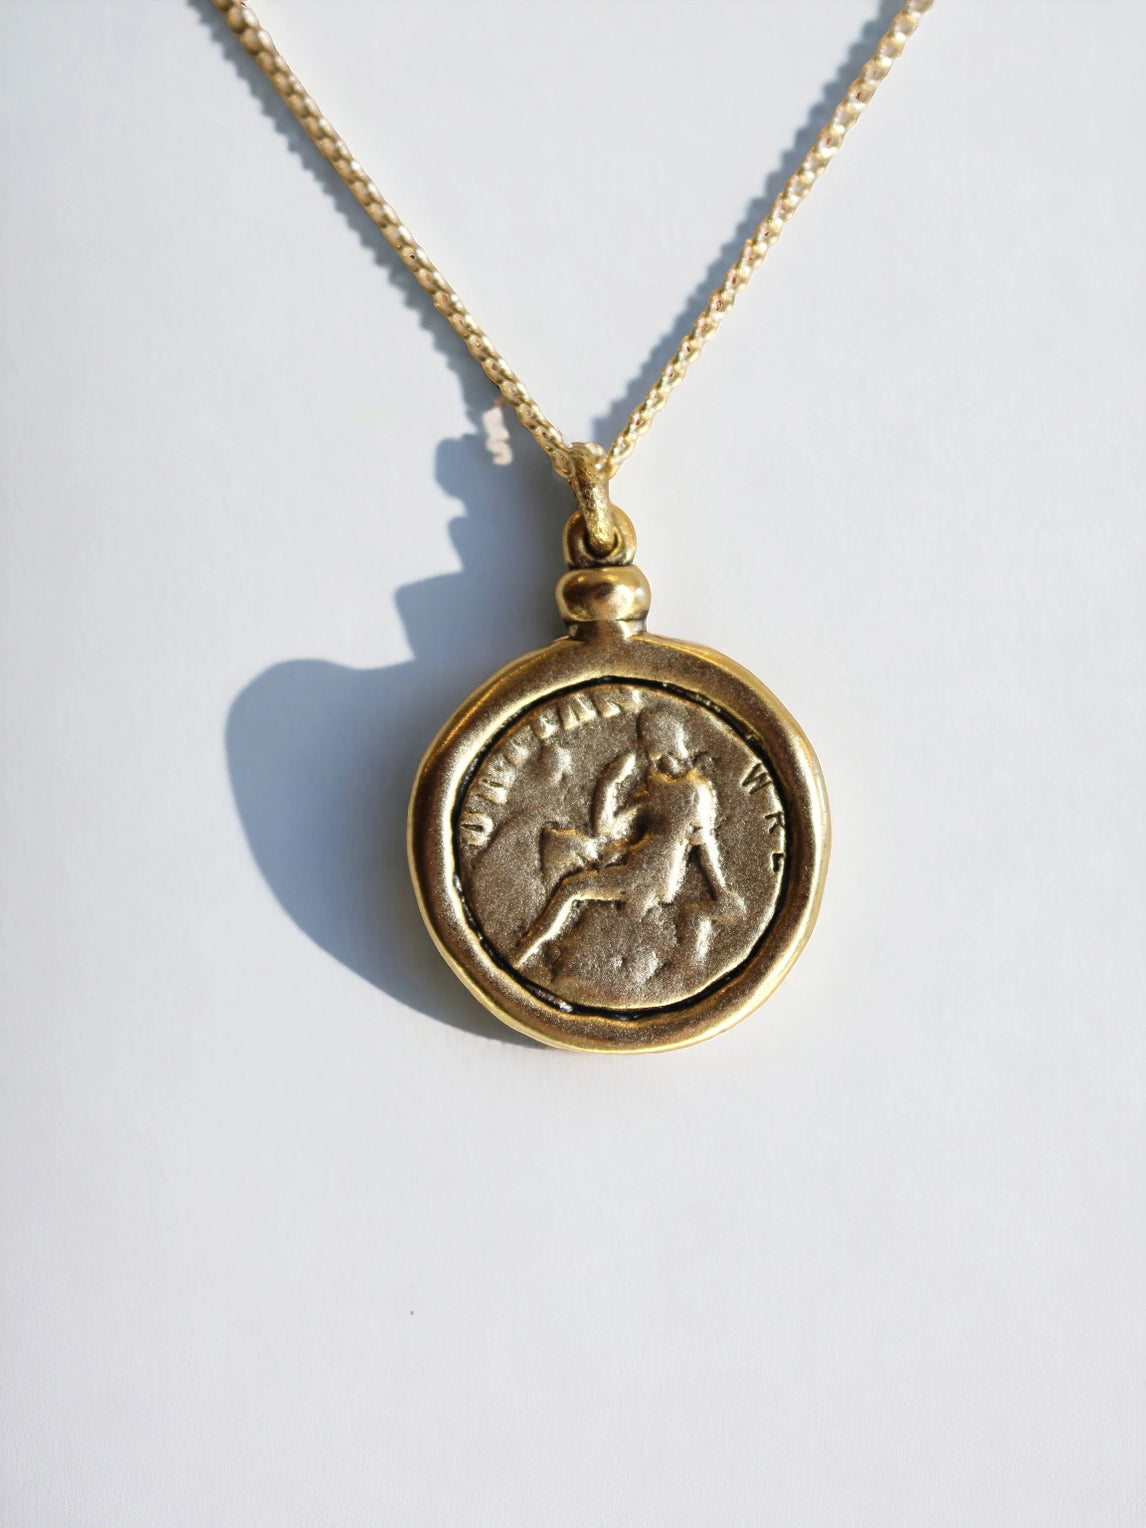 Antiqued Gold Coin Pendant Necklace